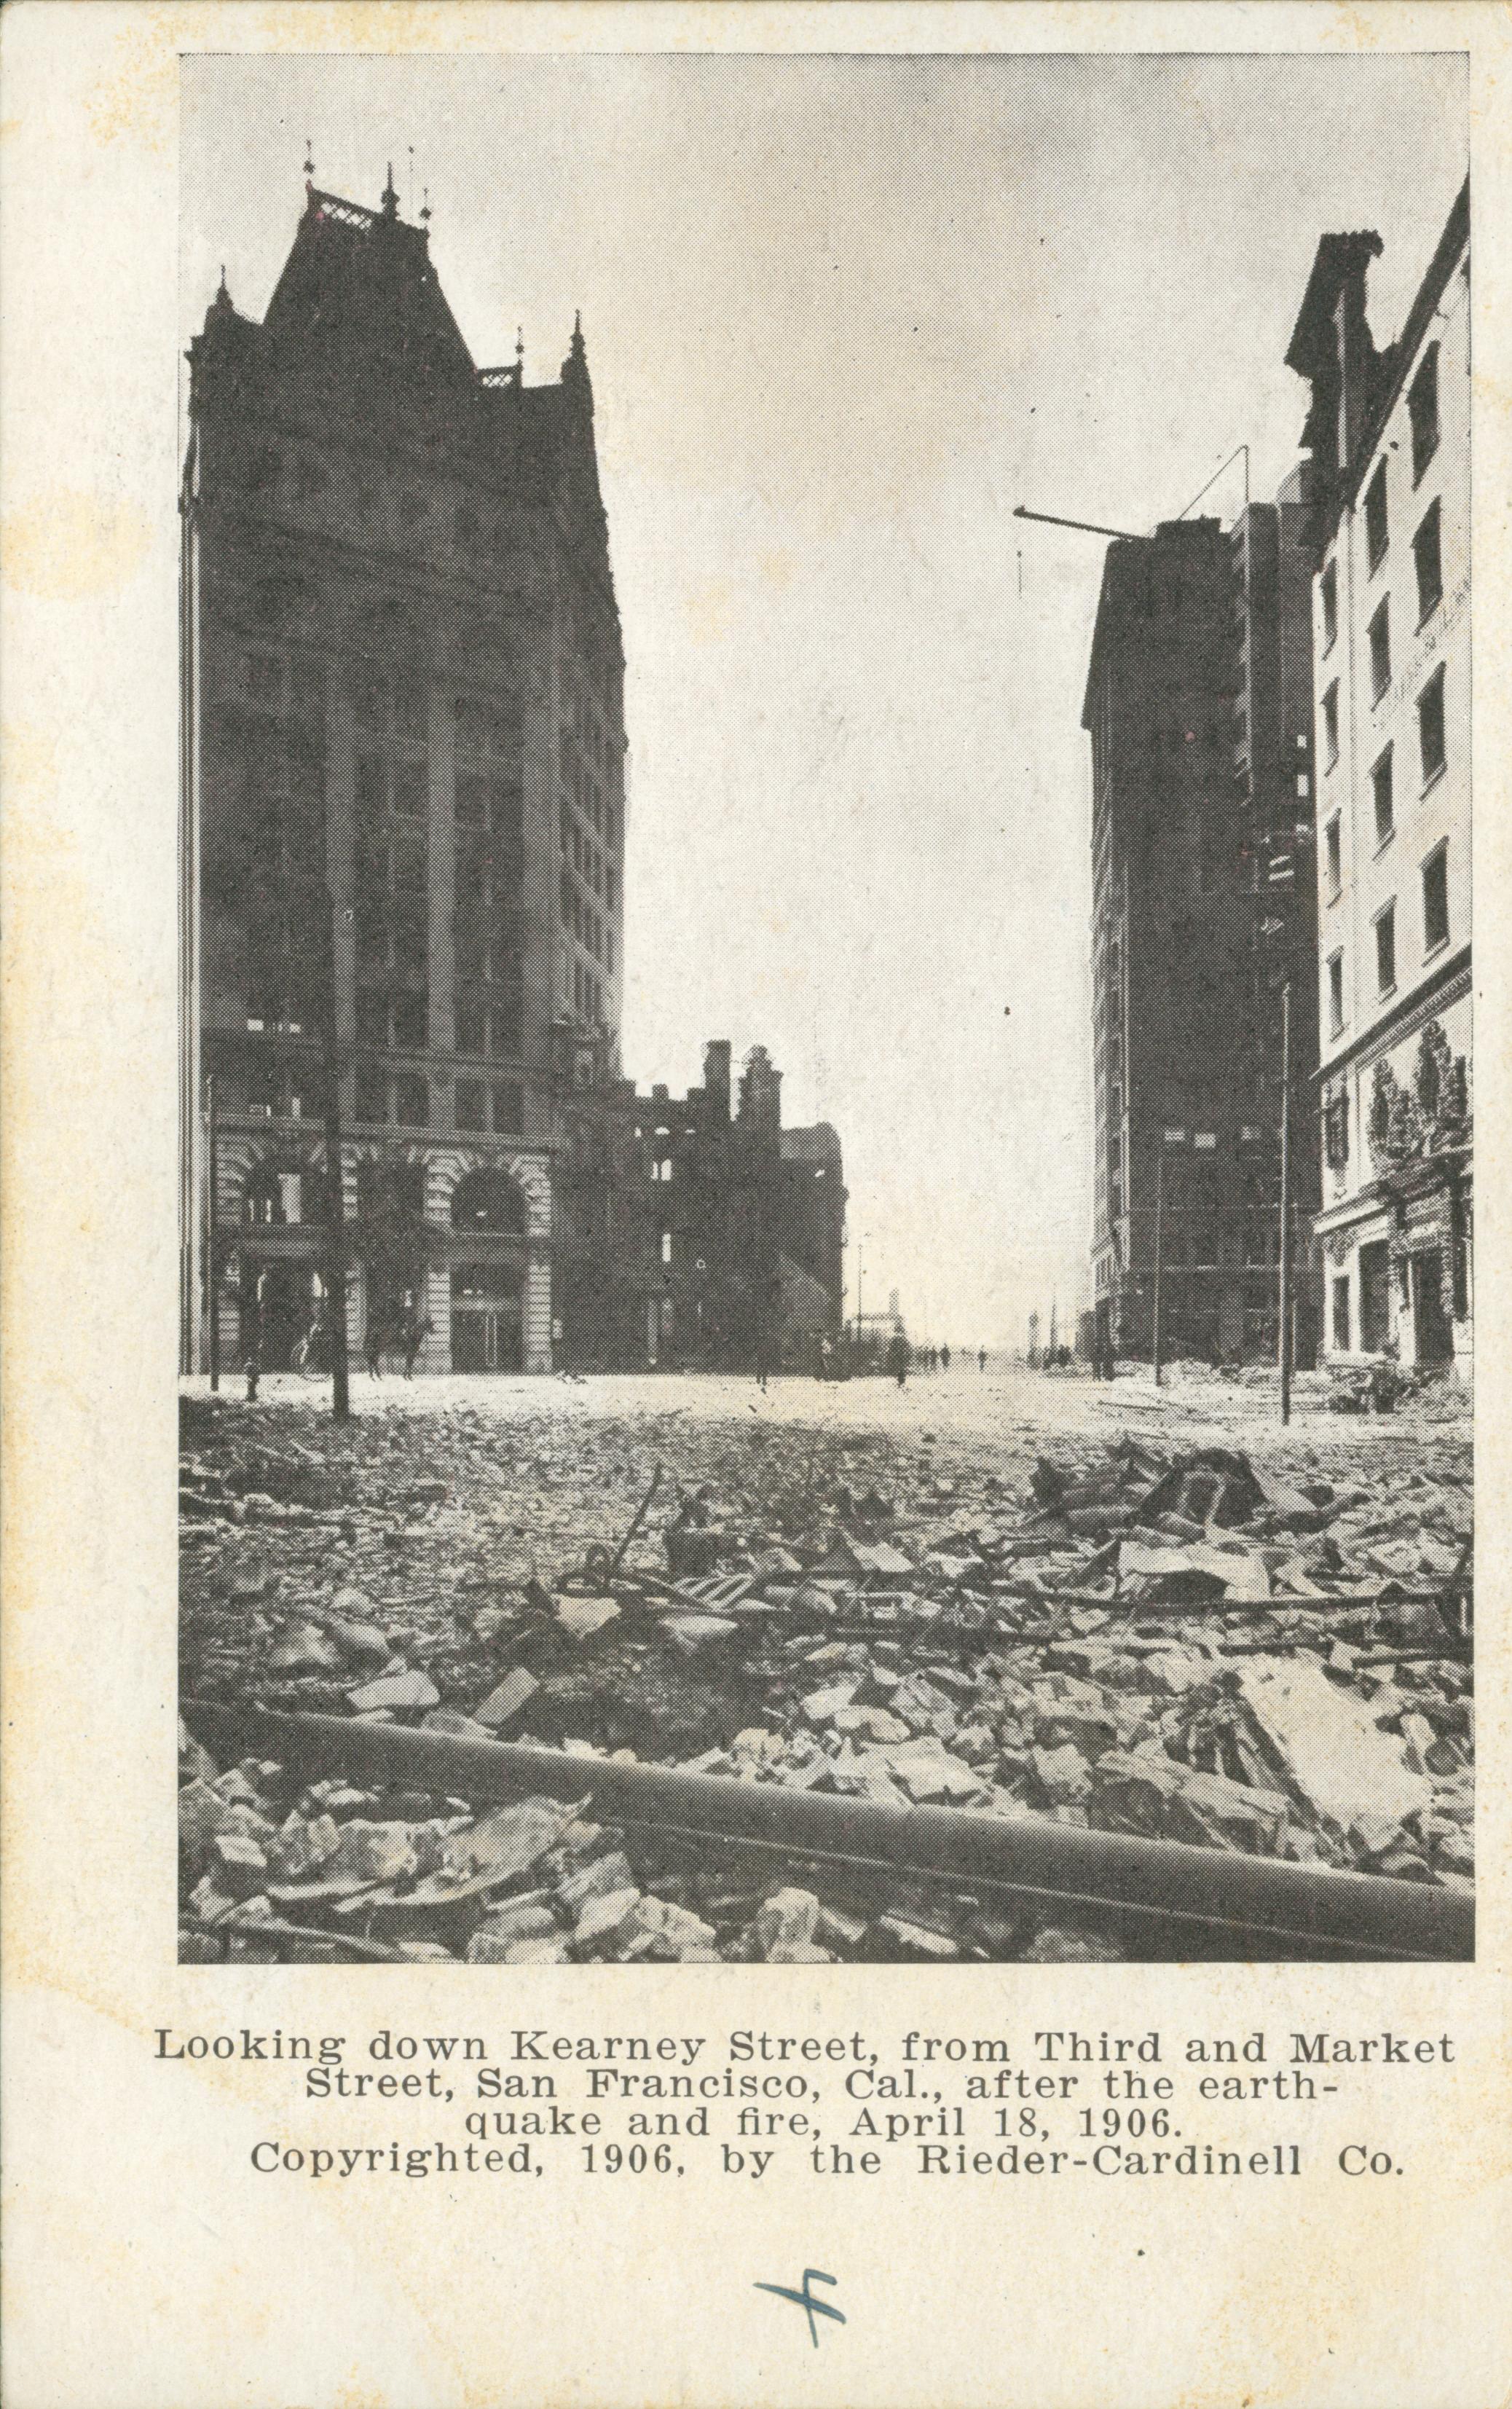 Photo showing Kearney Street covered in rubble from damaged buildings.